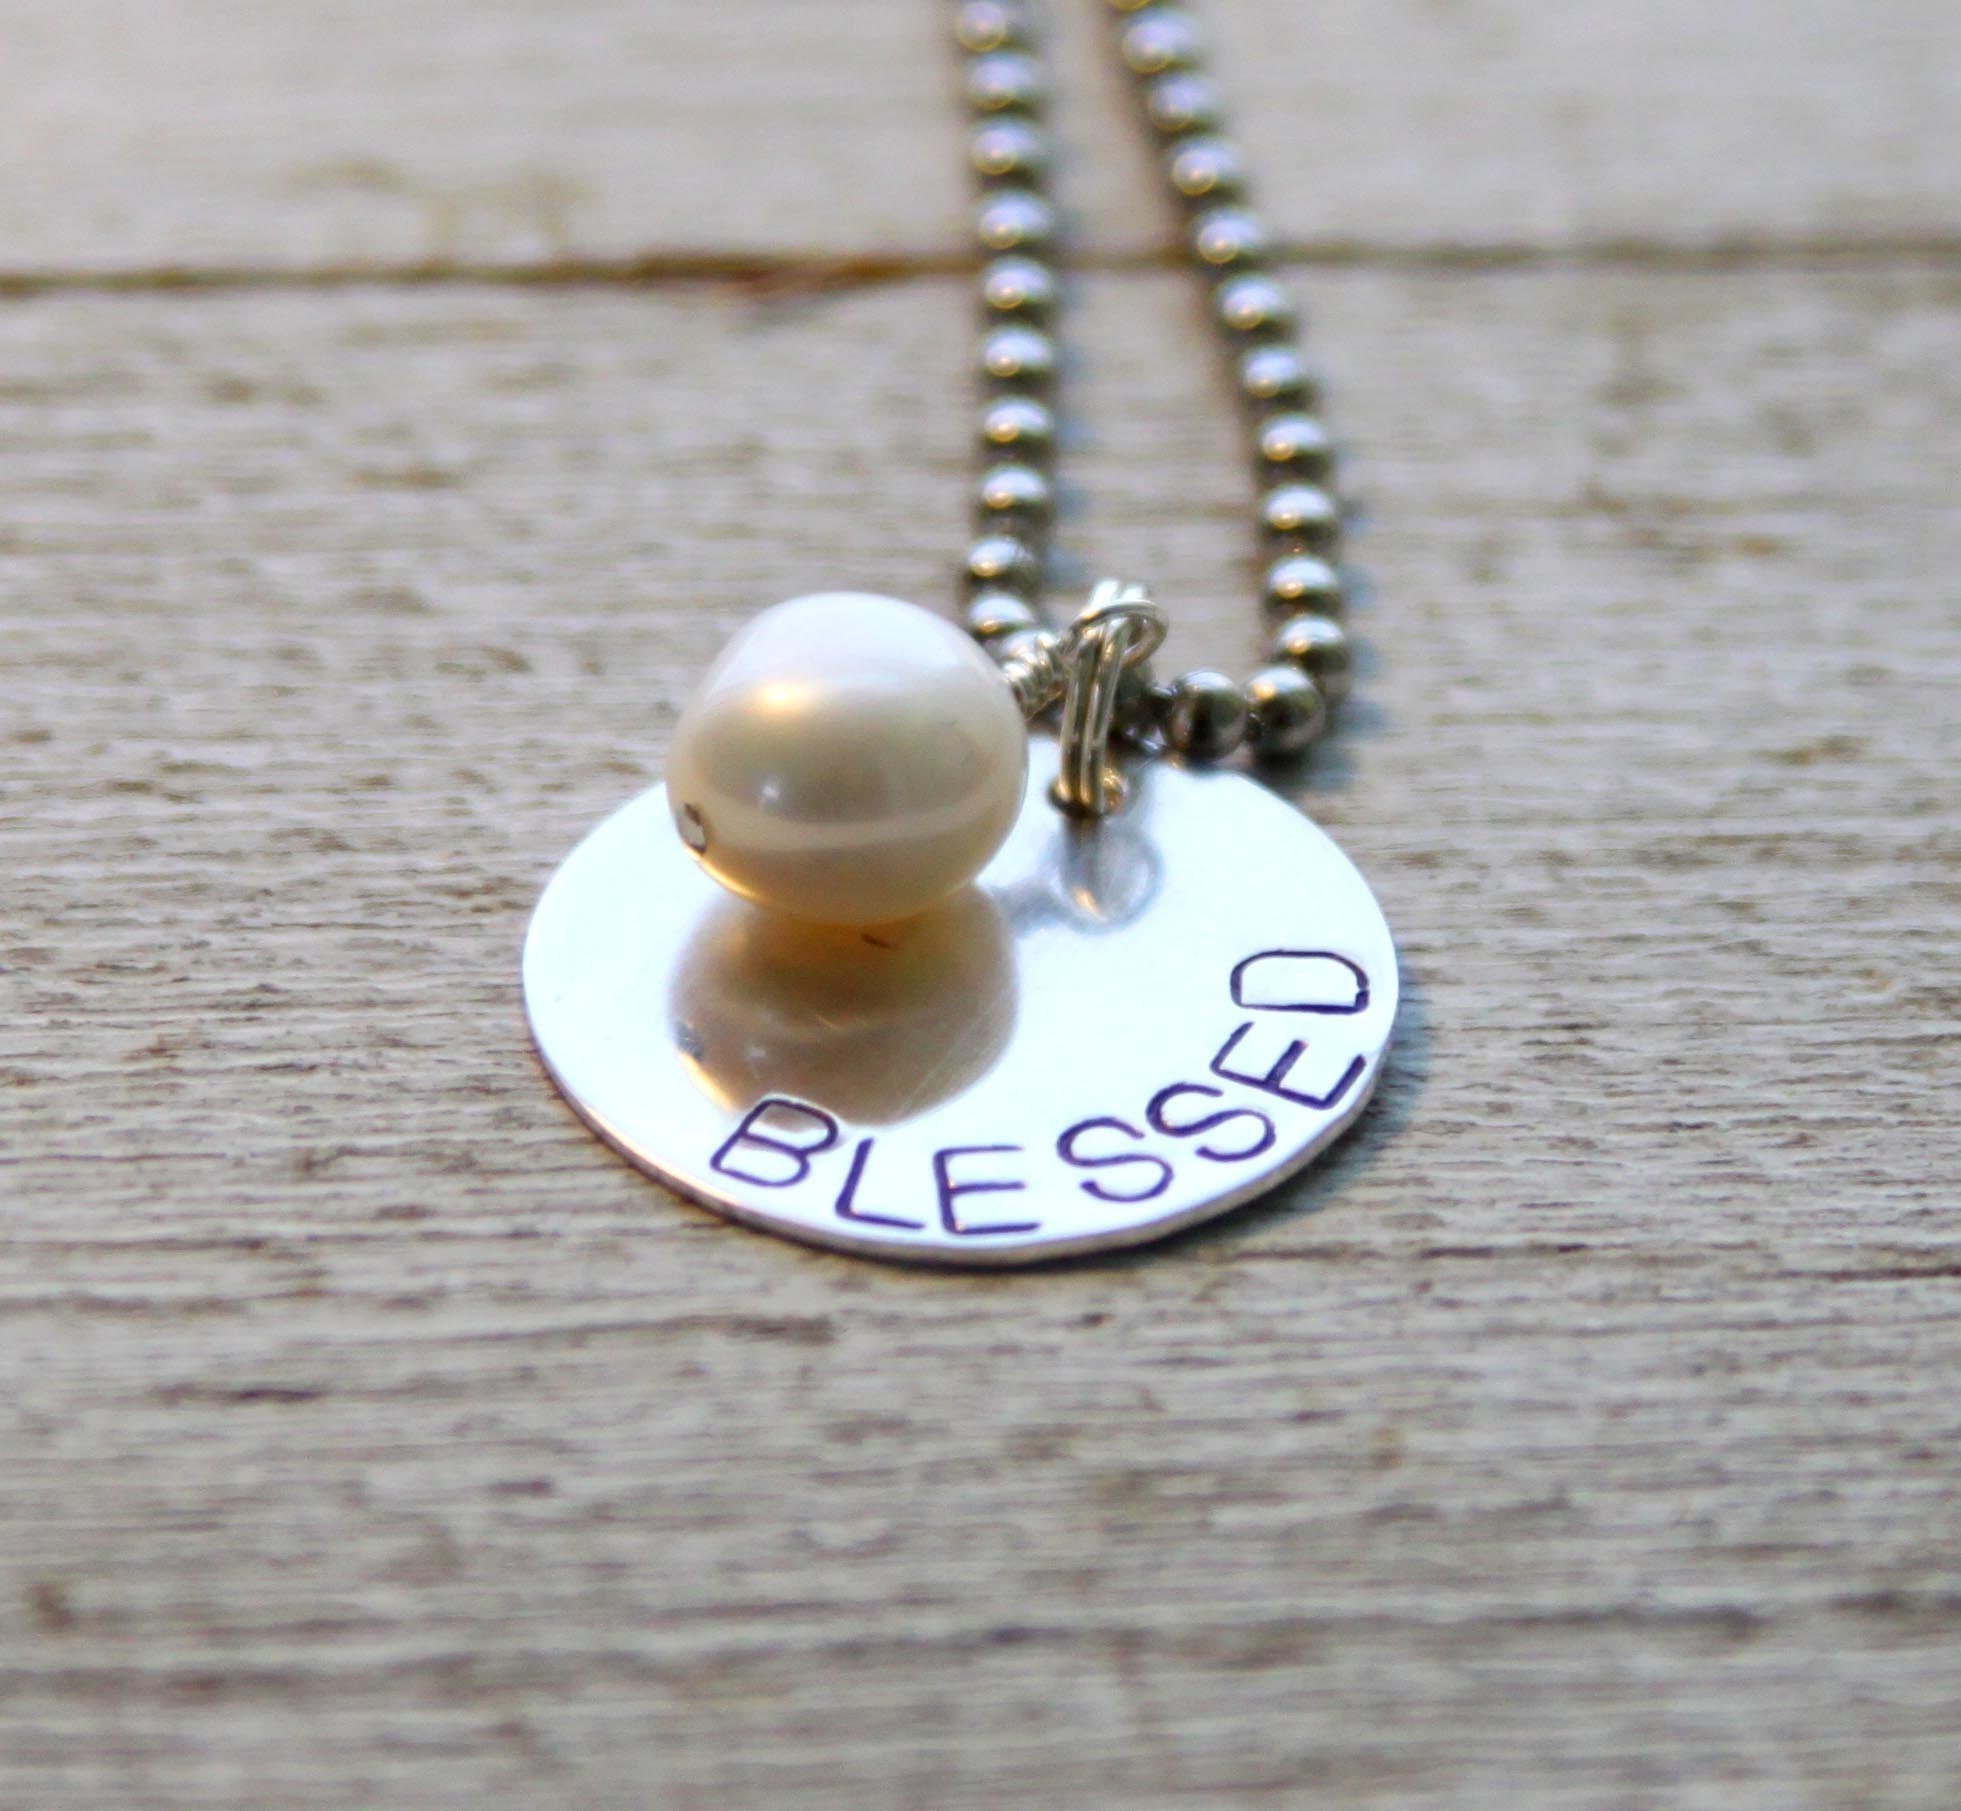 HAITI DISASTER RELIEF - blessed necklace